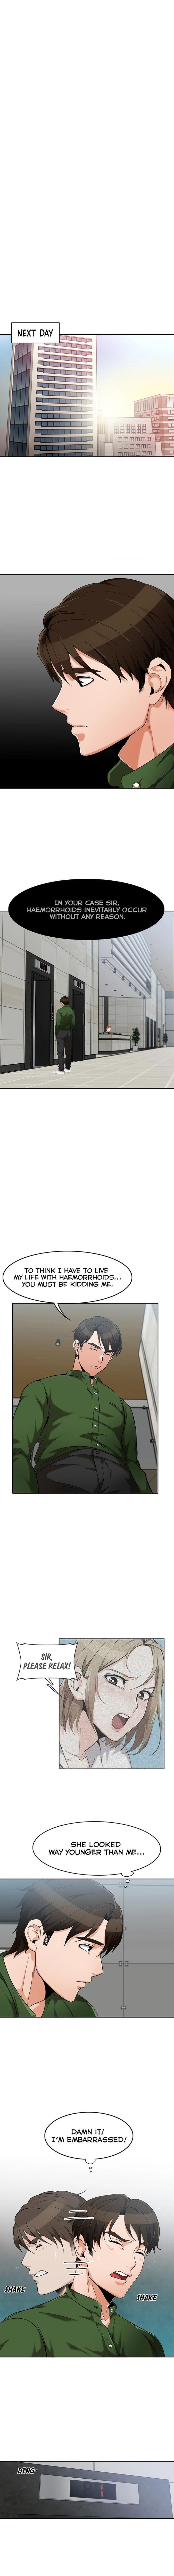 Pack OPPA, NOT THERE Ch. 1-2 Worship - Page 10